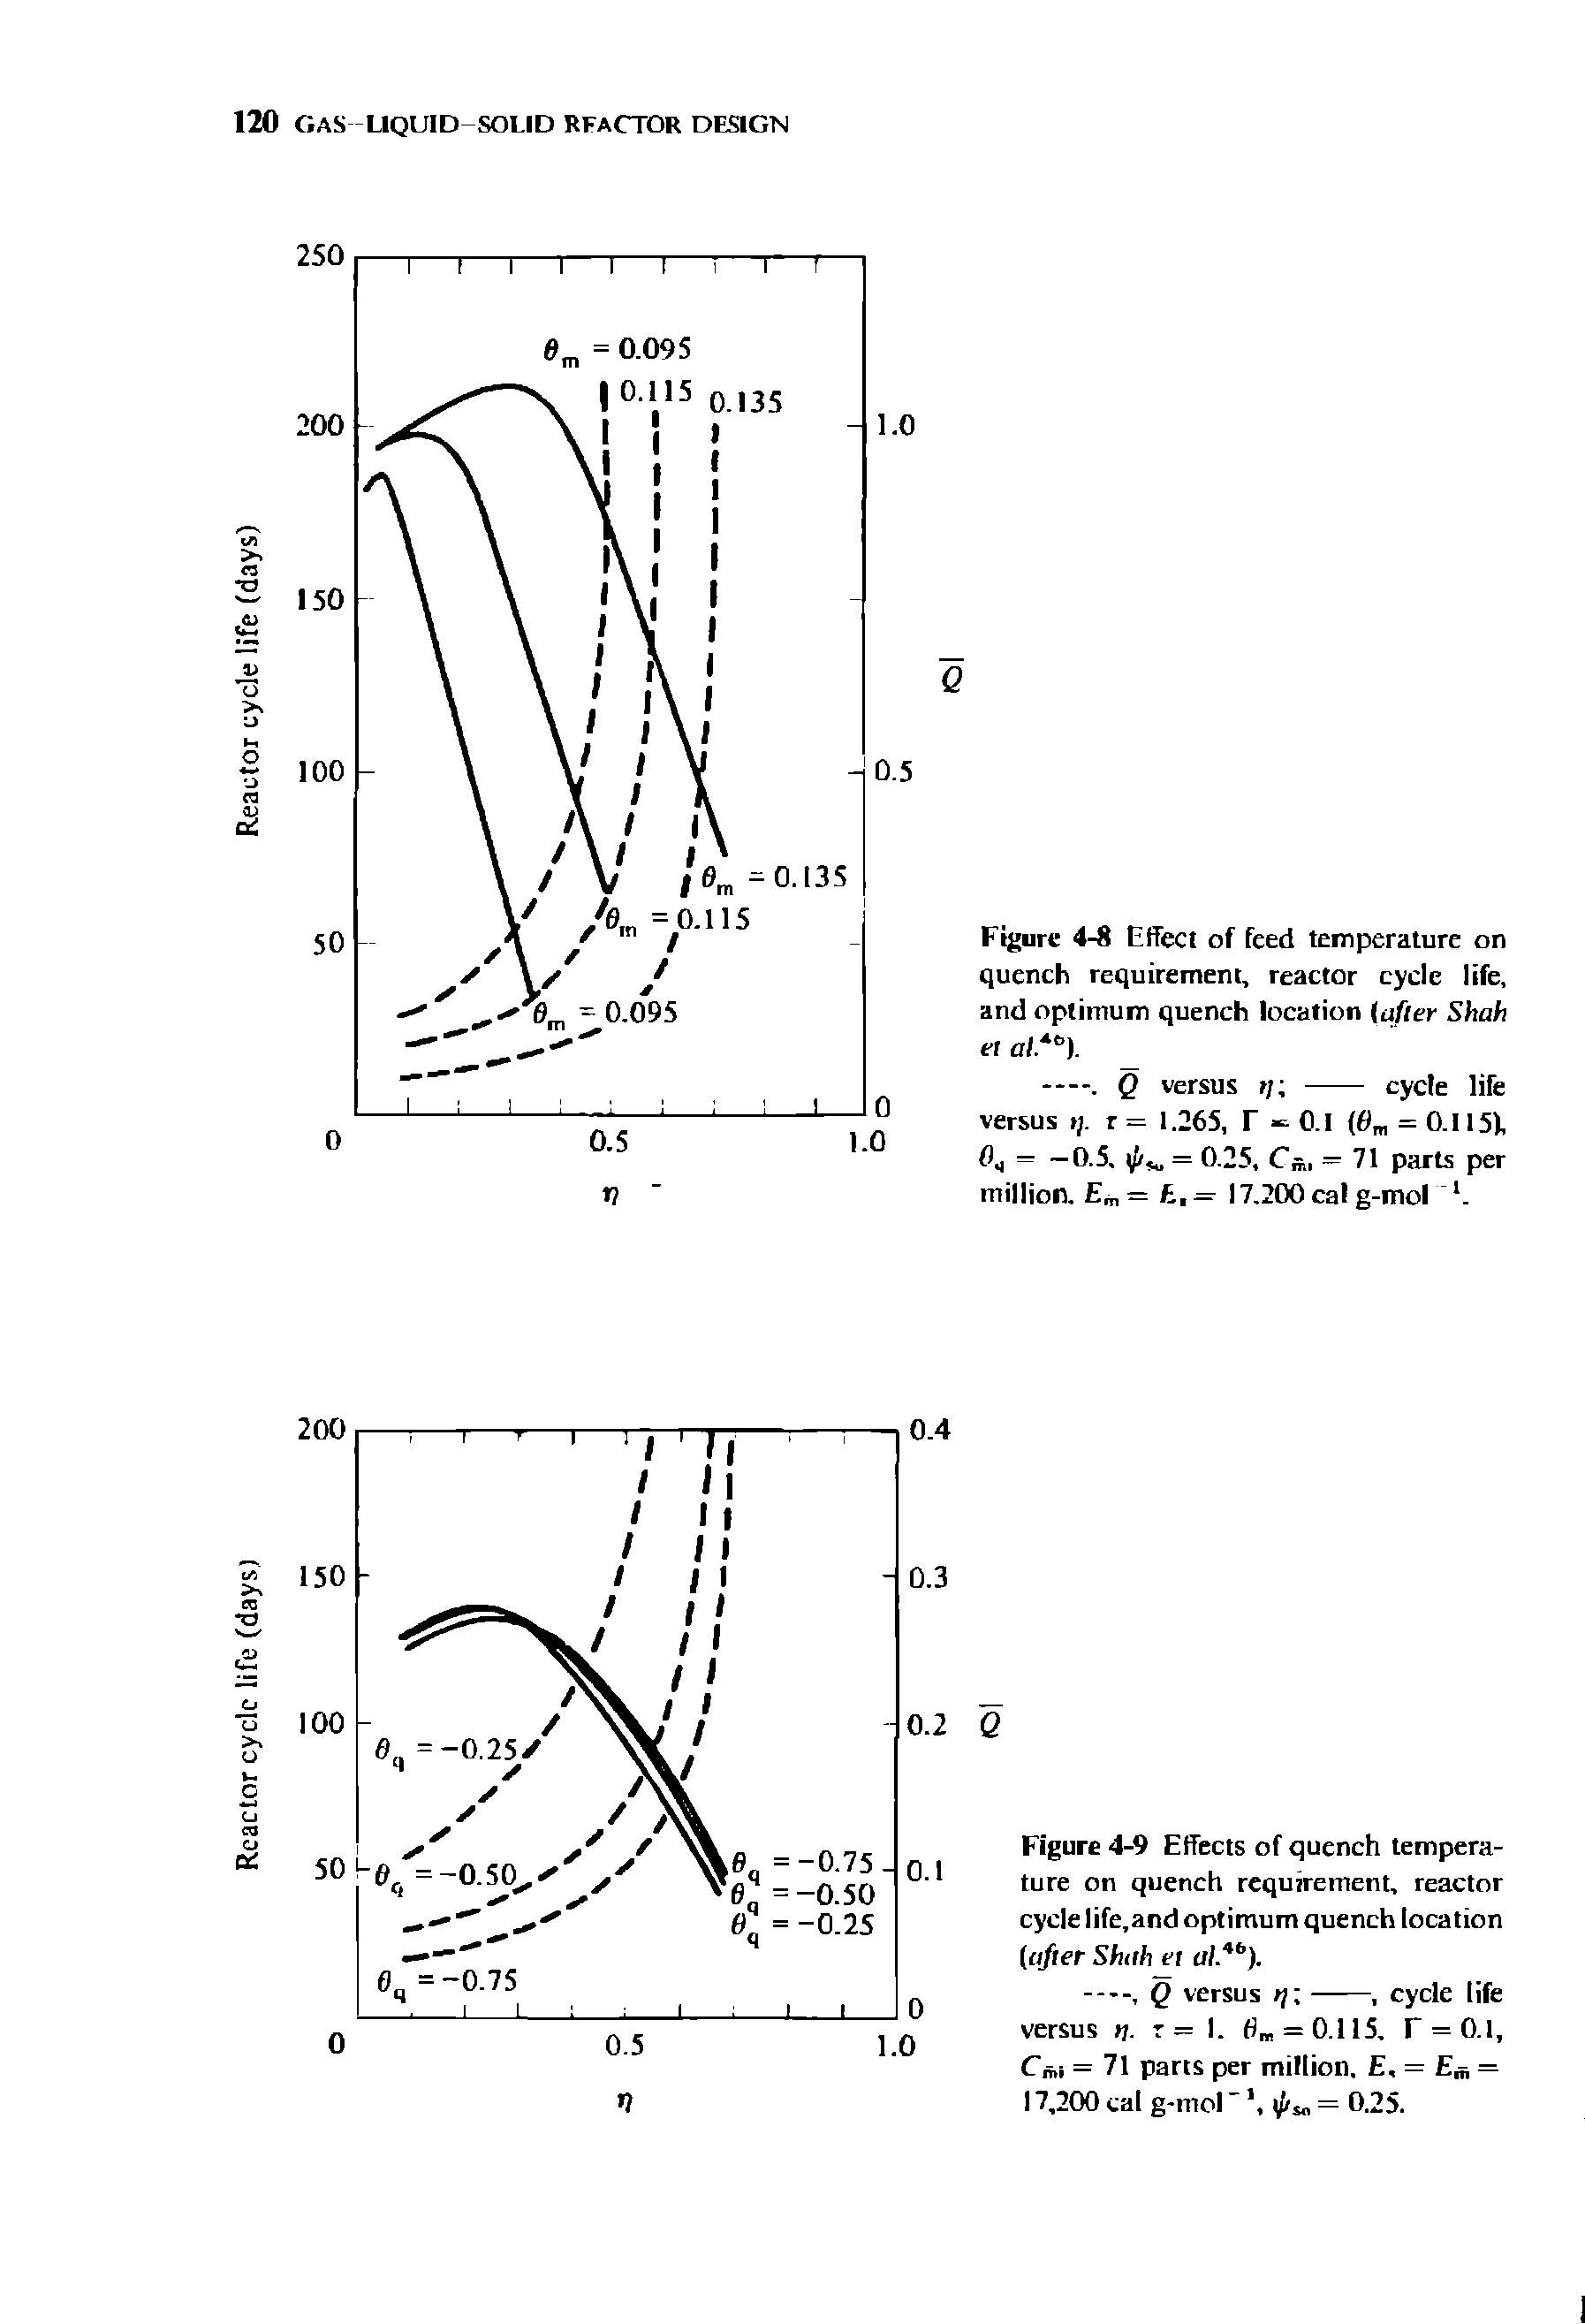 Figure 4-9 Effects of quench temperature on quench requirement, reactor cycle life.and optimum quench location (after Shah et al. b).